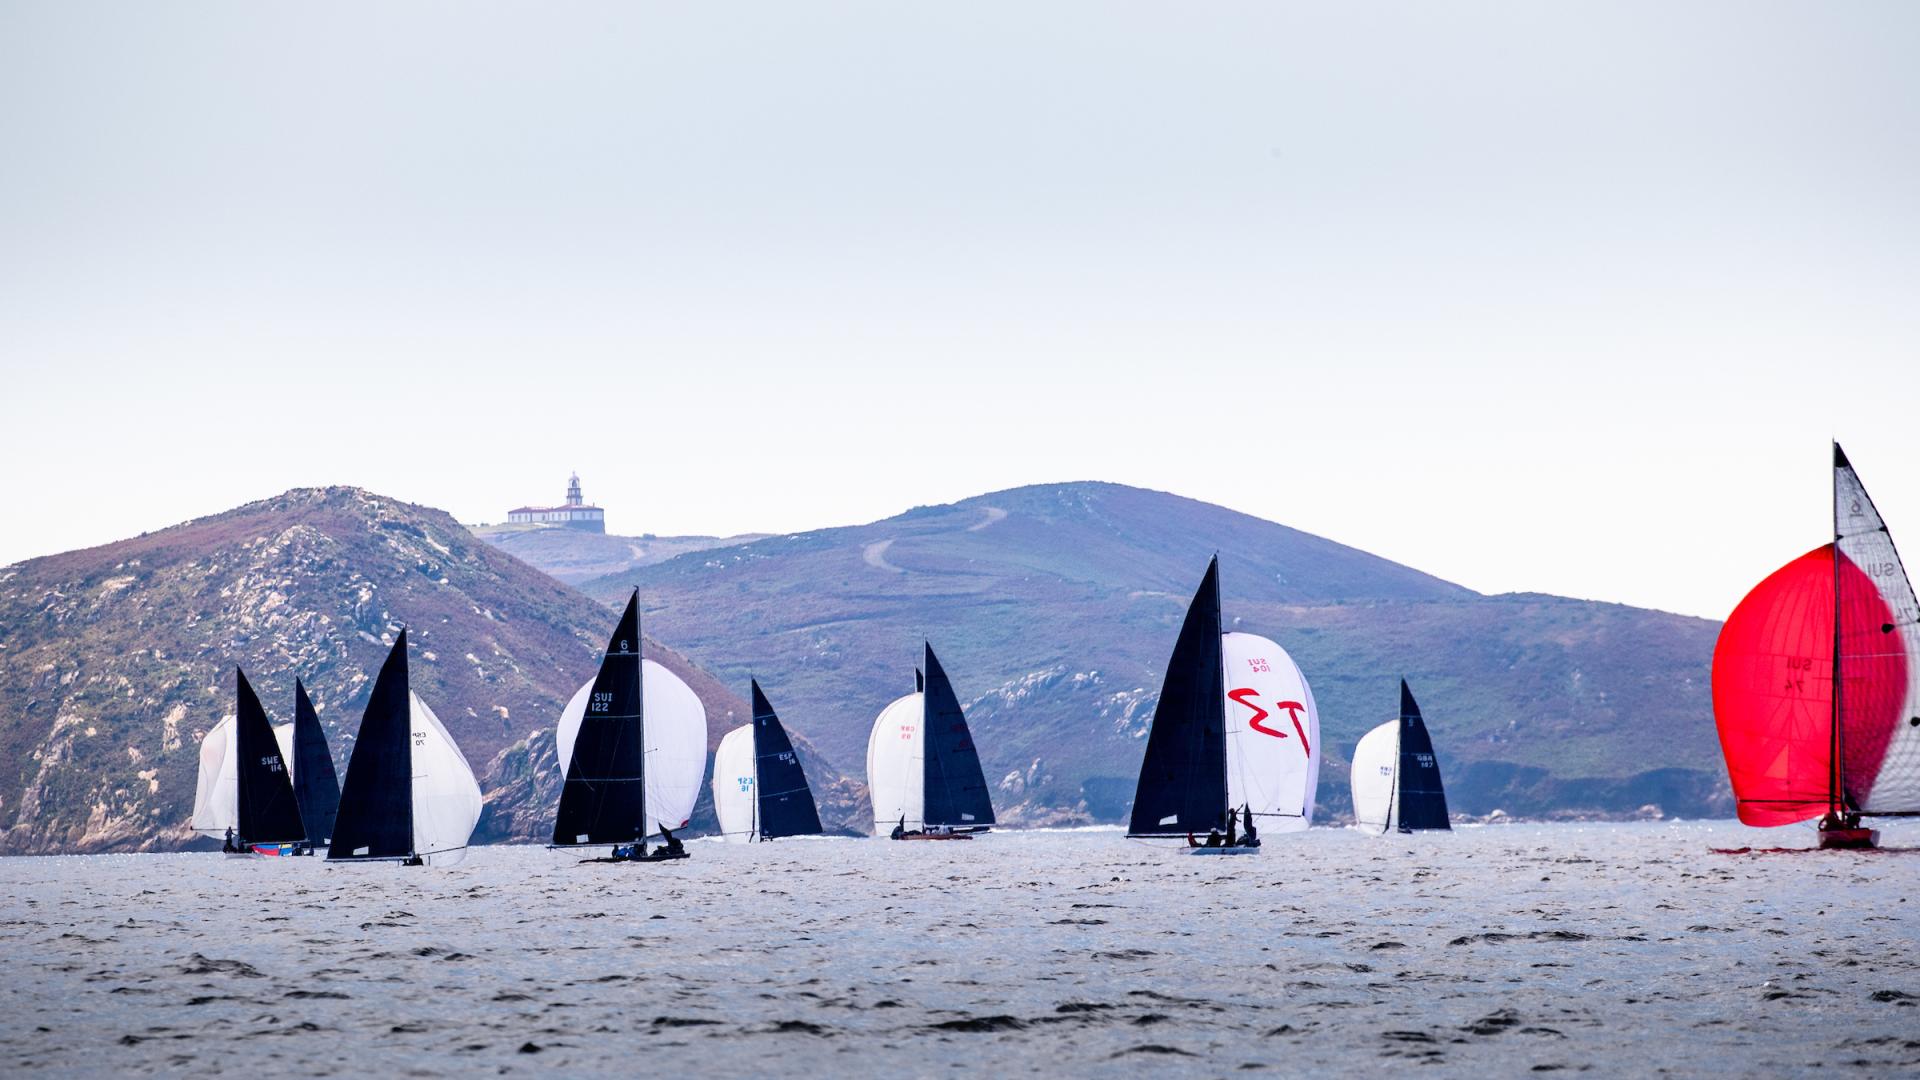 The Finns and the Swiss take control of the Xacobeo 6mR Europeans